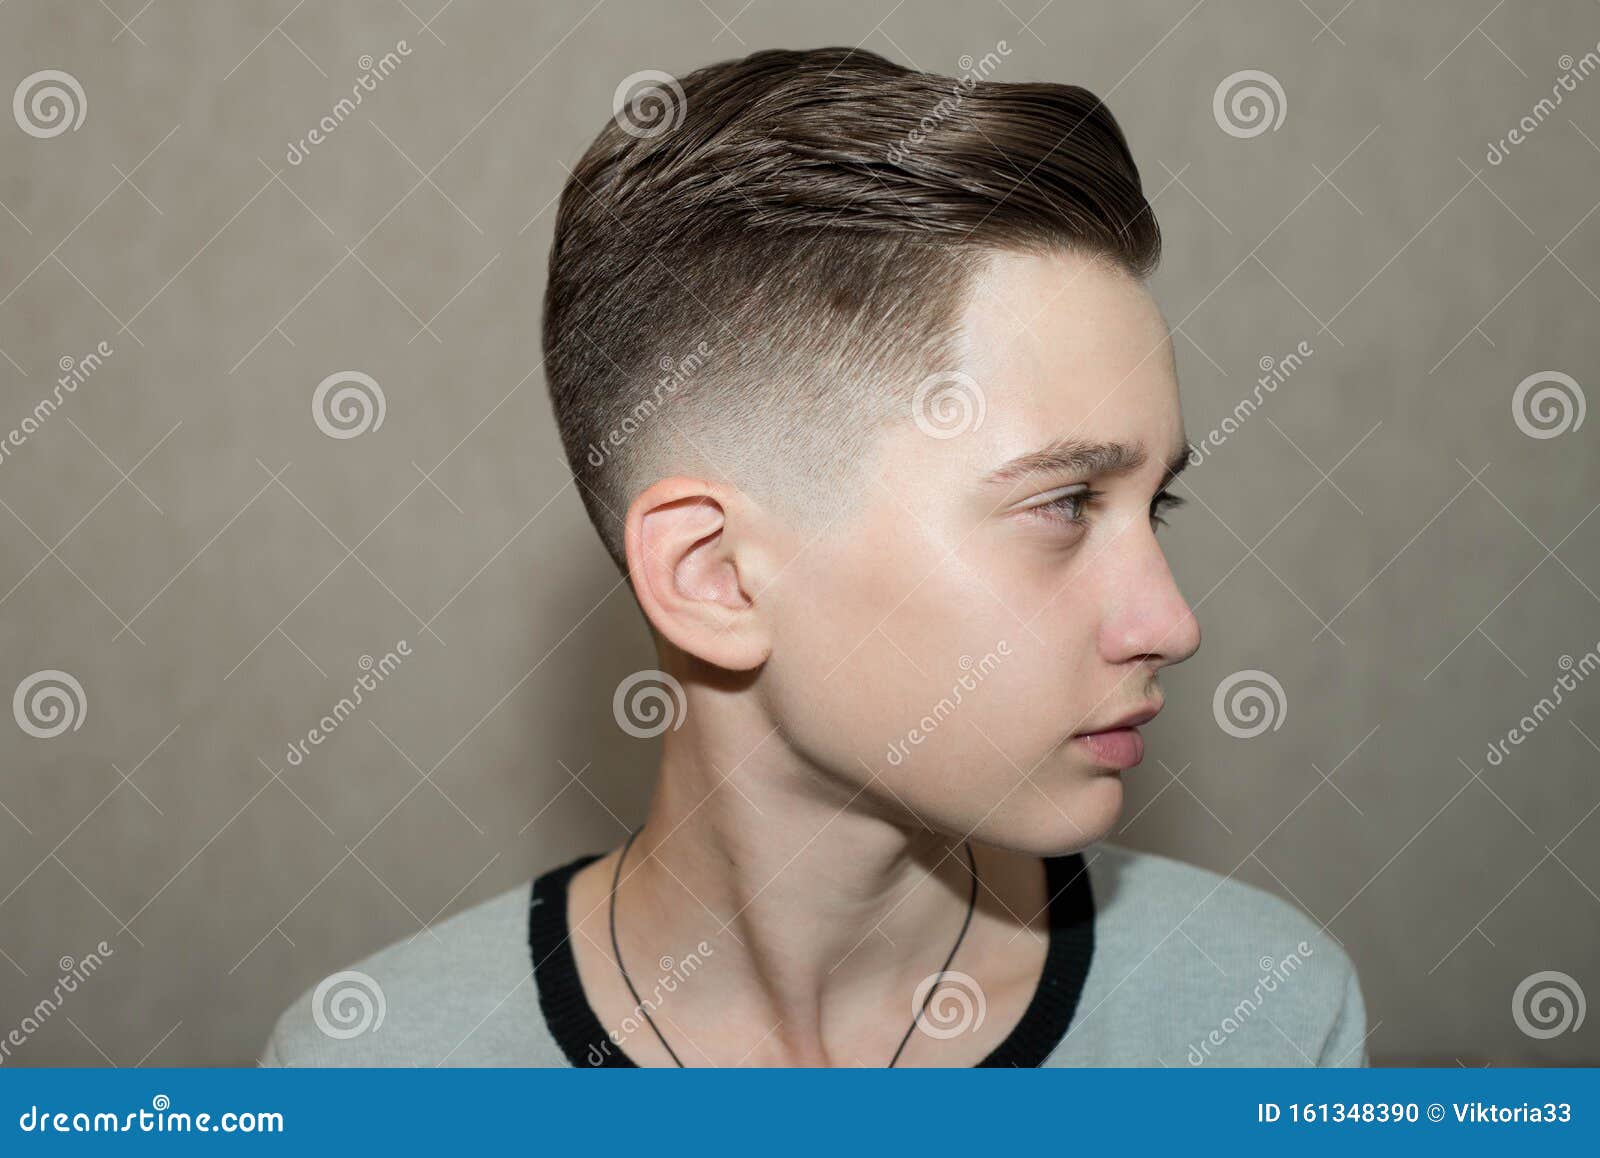 20 Coolest Mid Fade Haircuts for Men in 2024 - The Trend Spotter